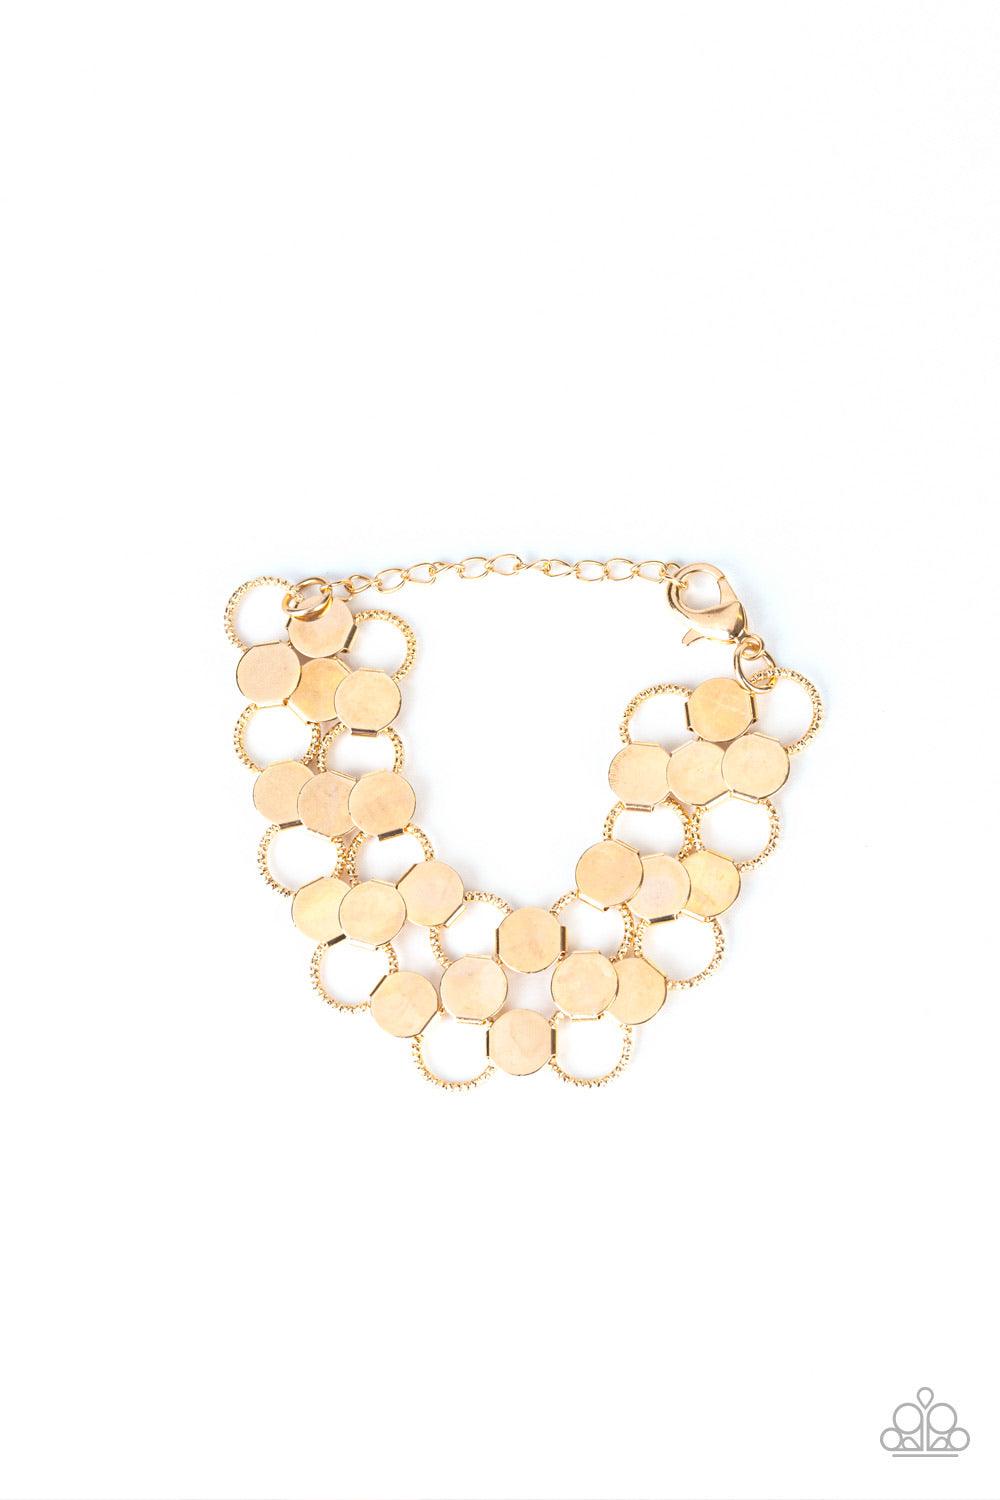 Paparazzi Accessories Cast A Wider Net - Gold Dotted with reflective gold discs, an interlocking net of textured gold rings link into edgy netted layers around the wrist. Features an adjustable clasp closure. Jewelry